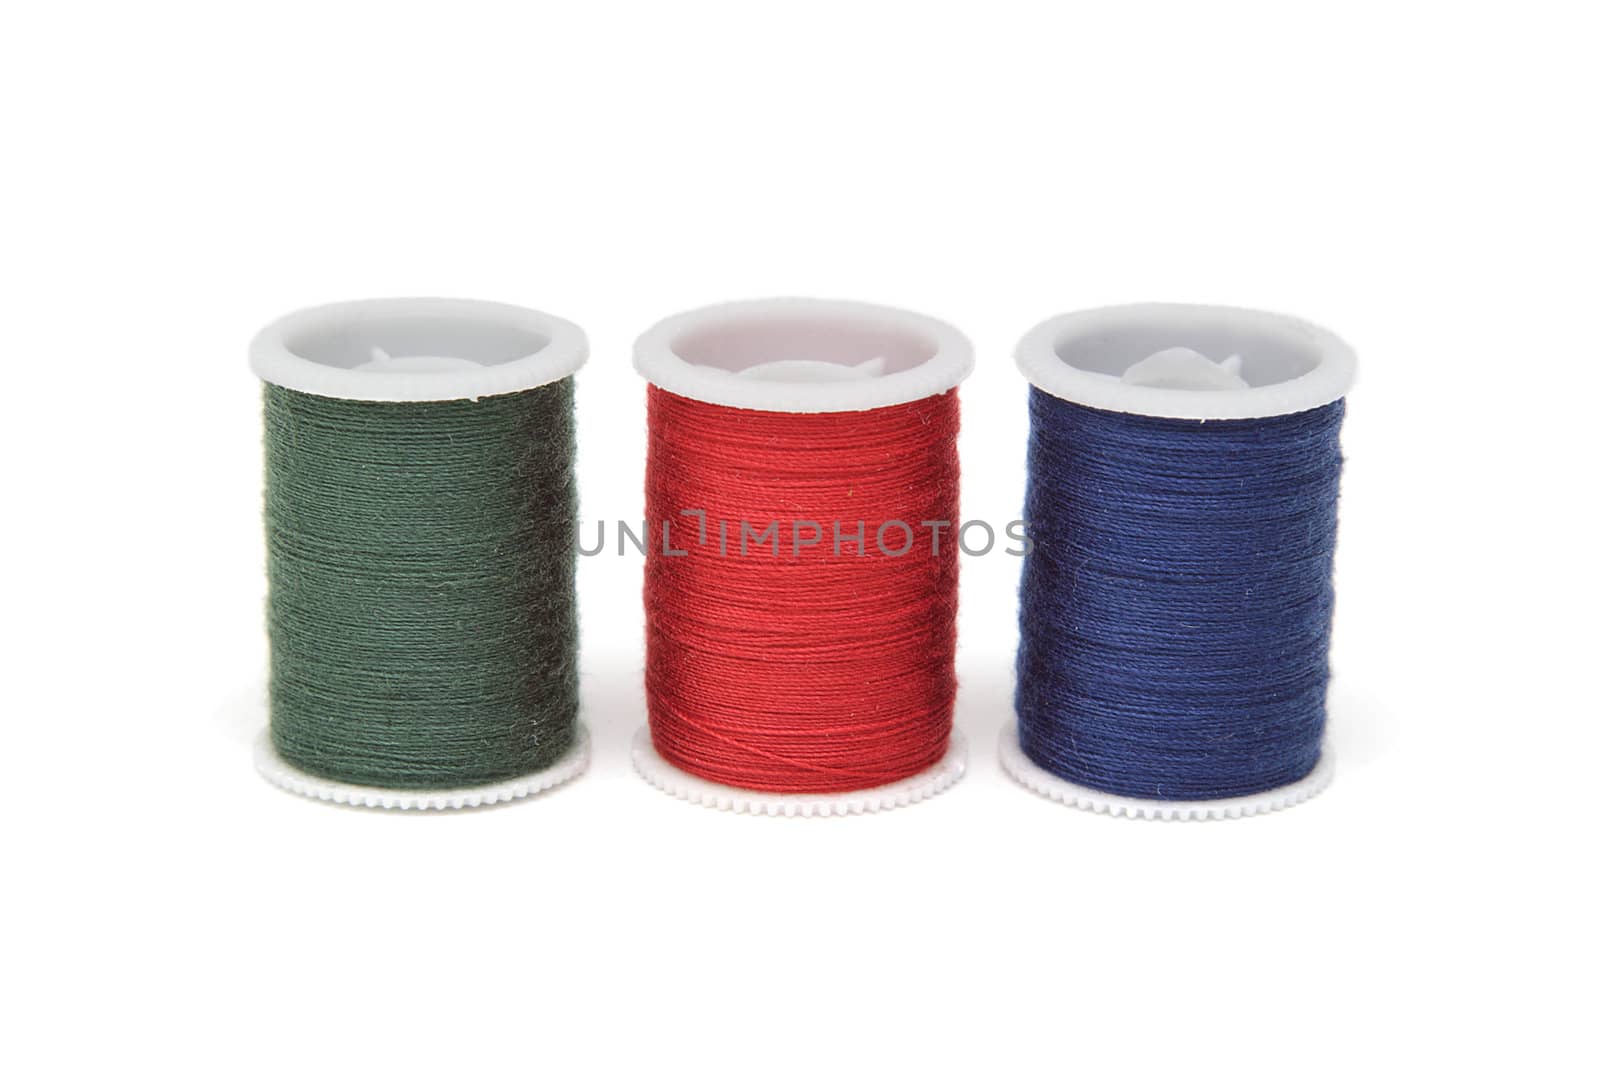 Spools of thread by pulen